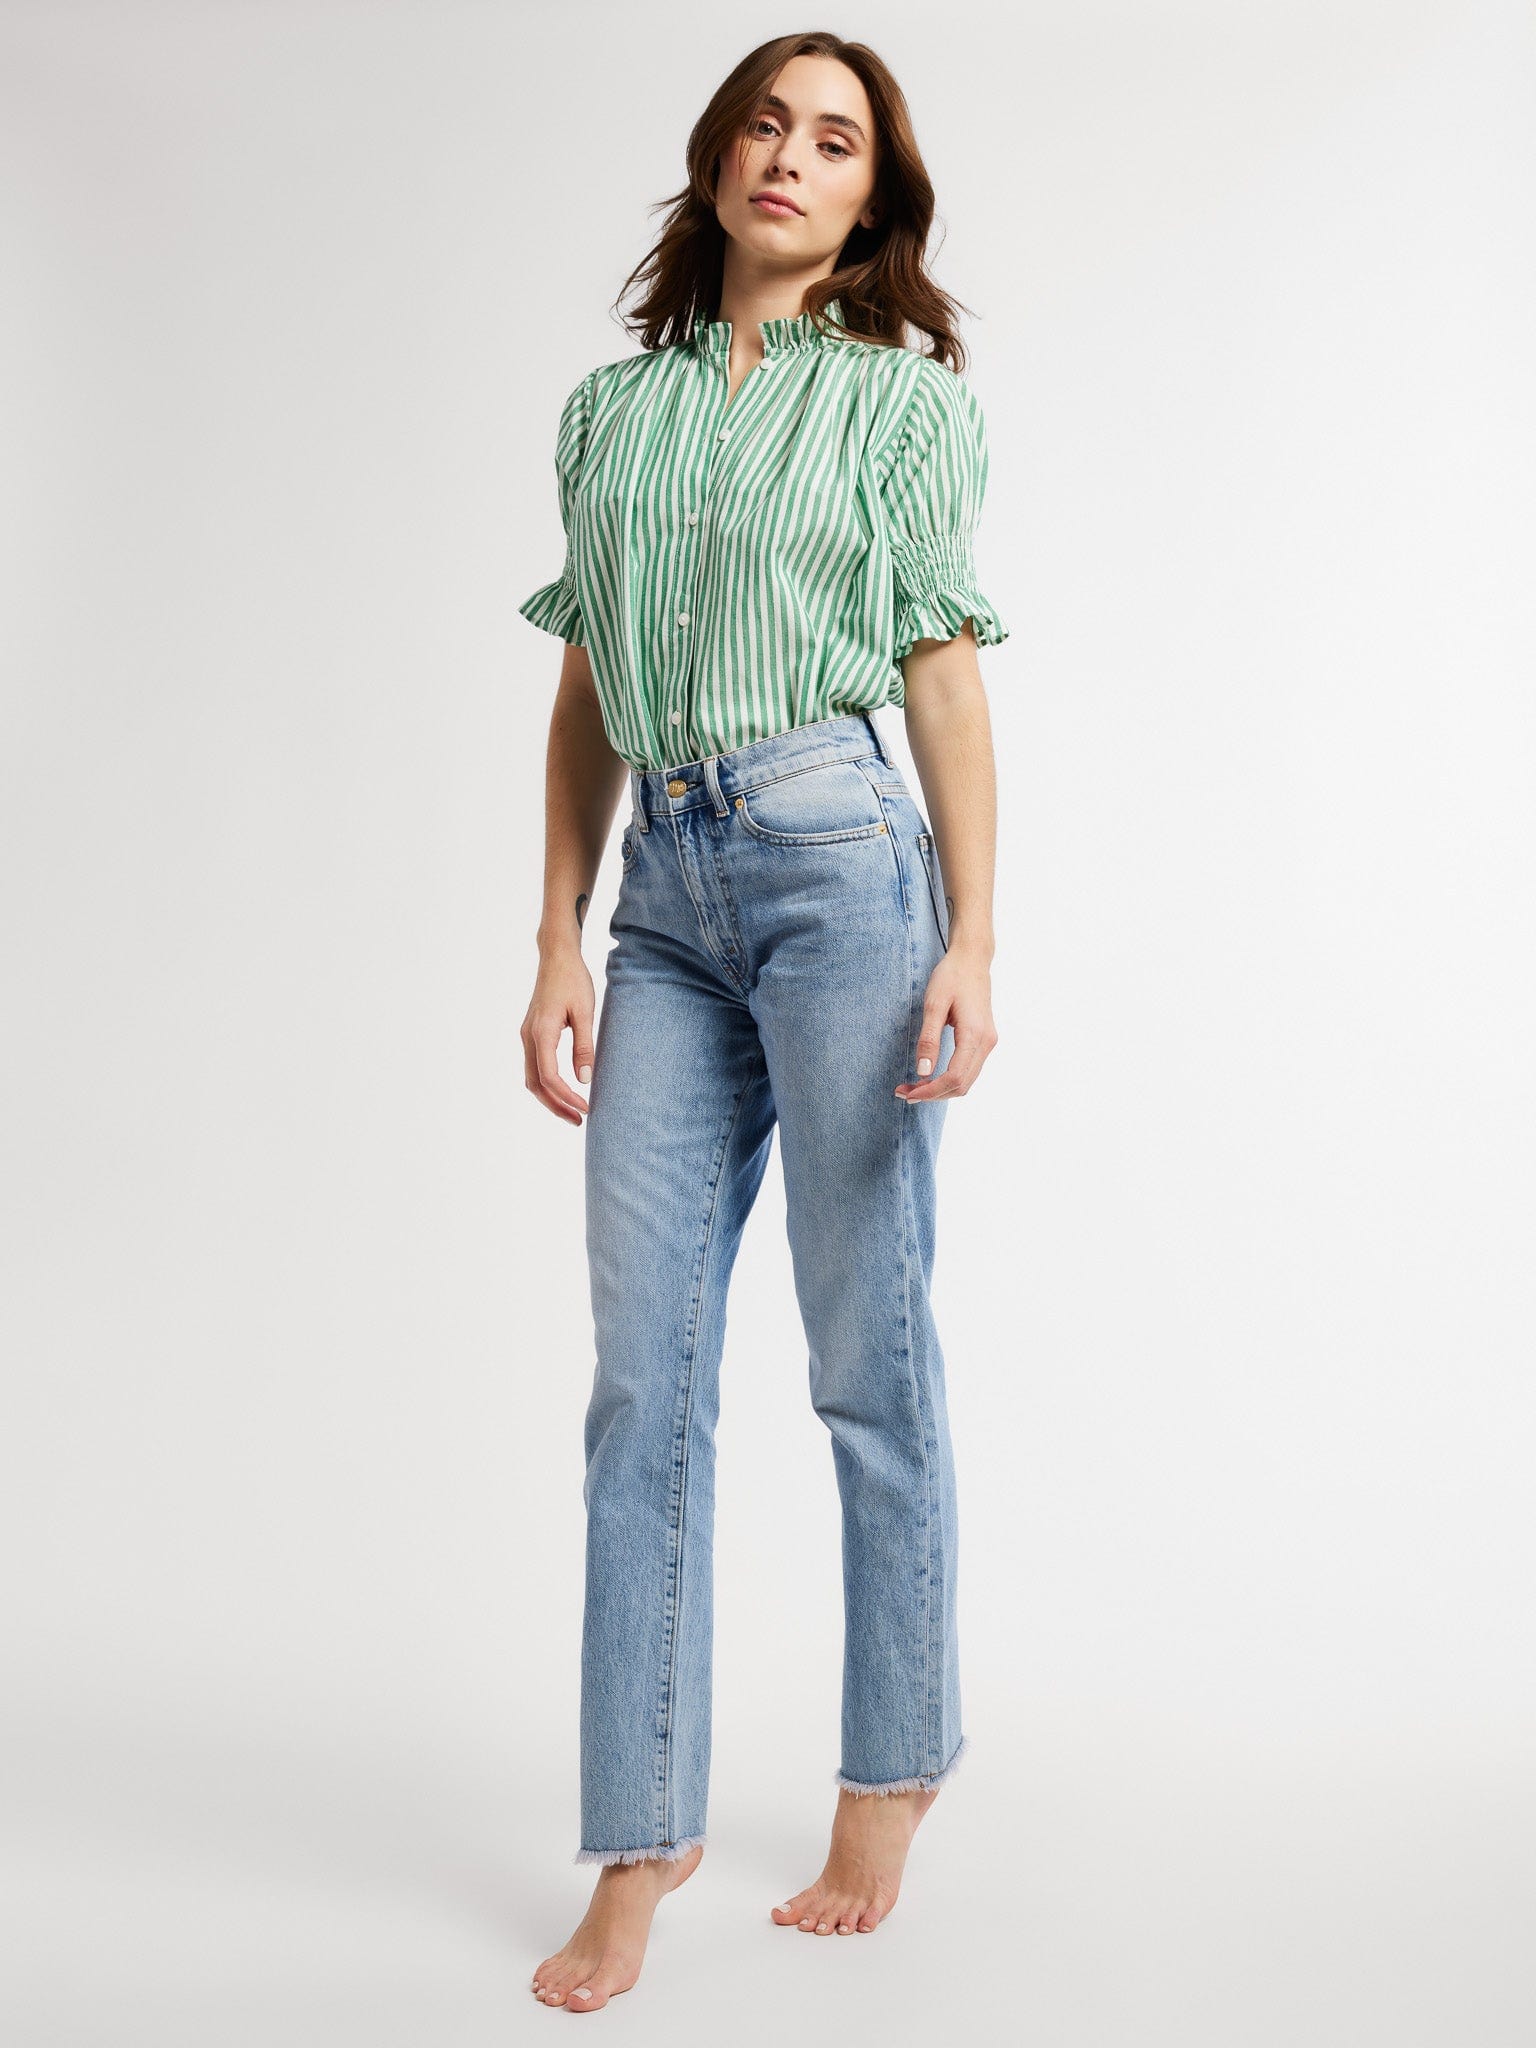 MILLE Clothing Marnie Top in Kelly Stripe